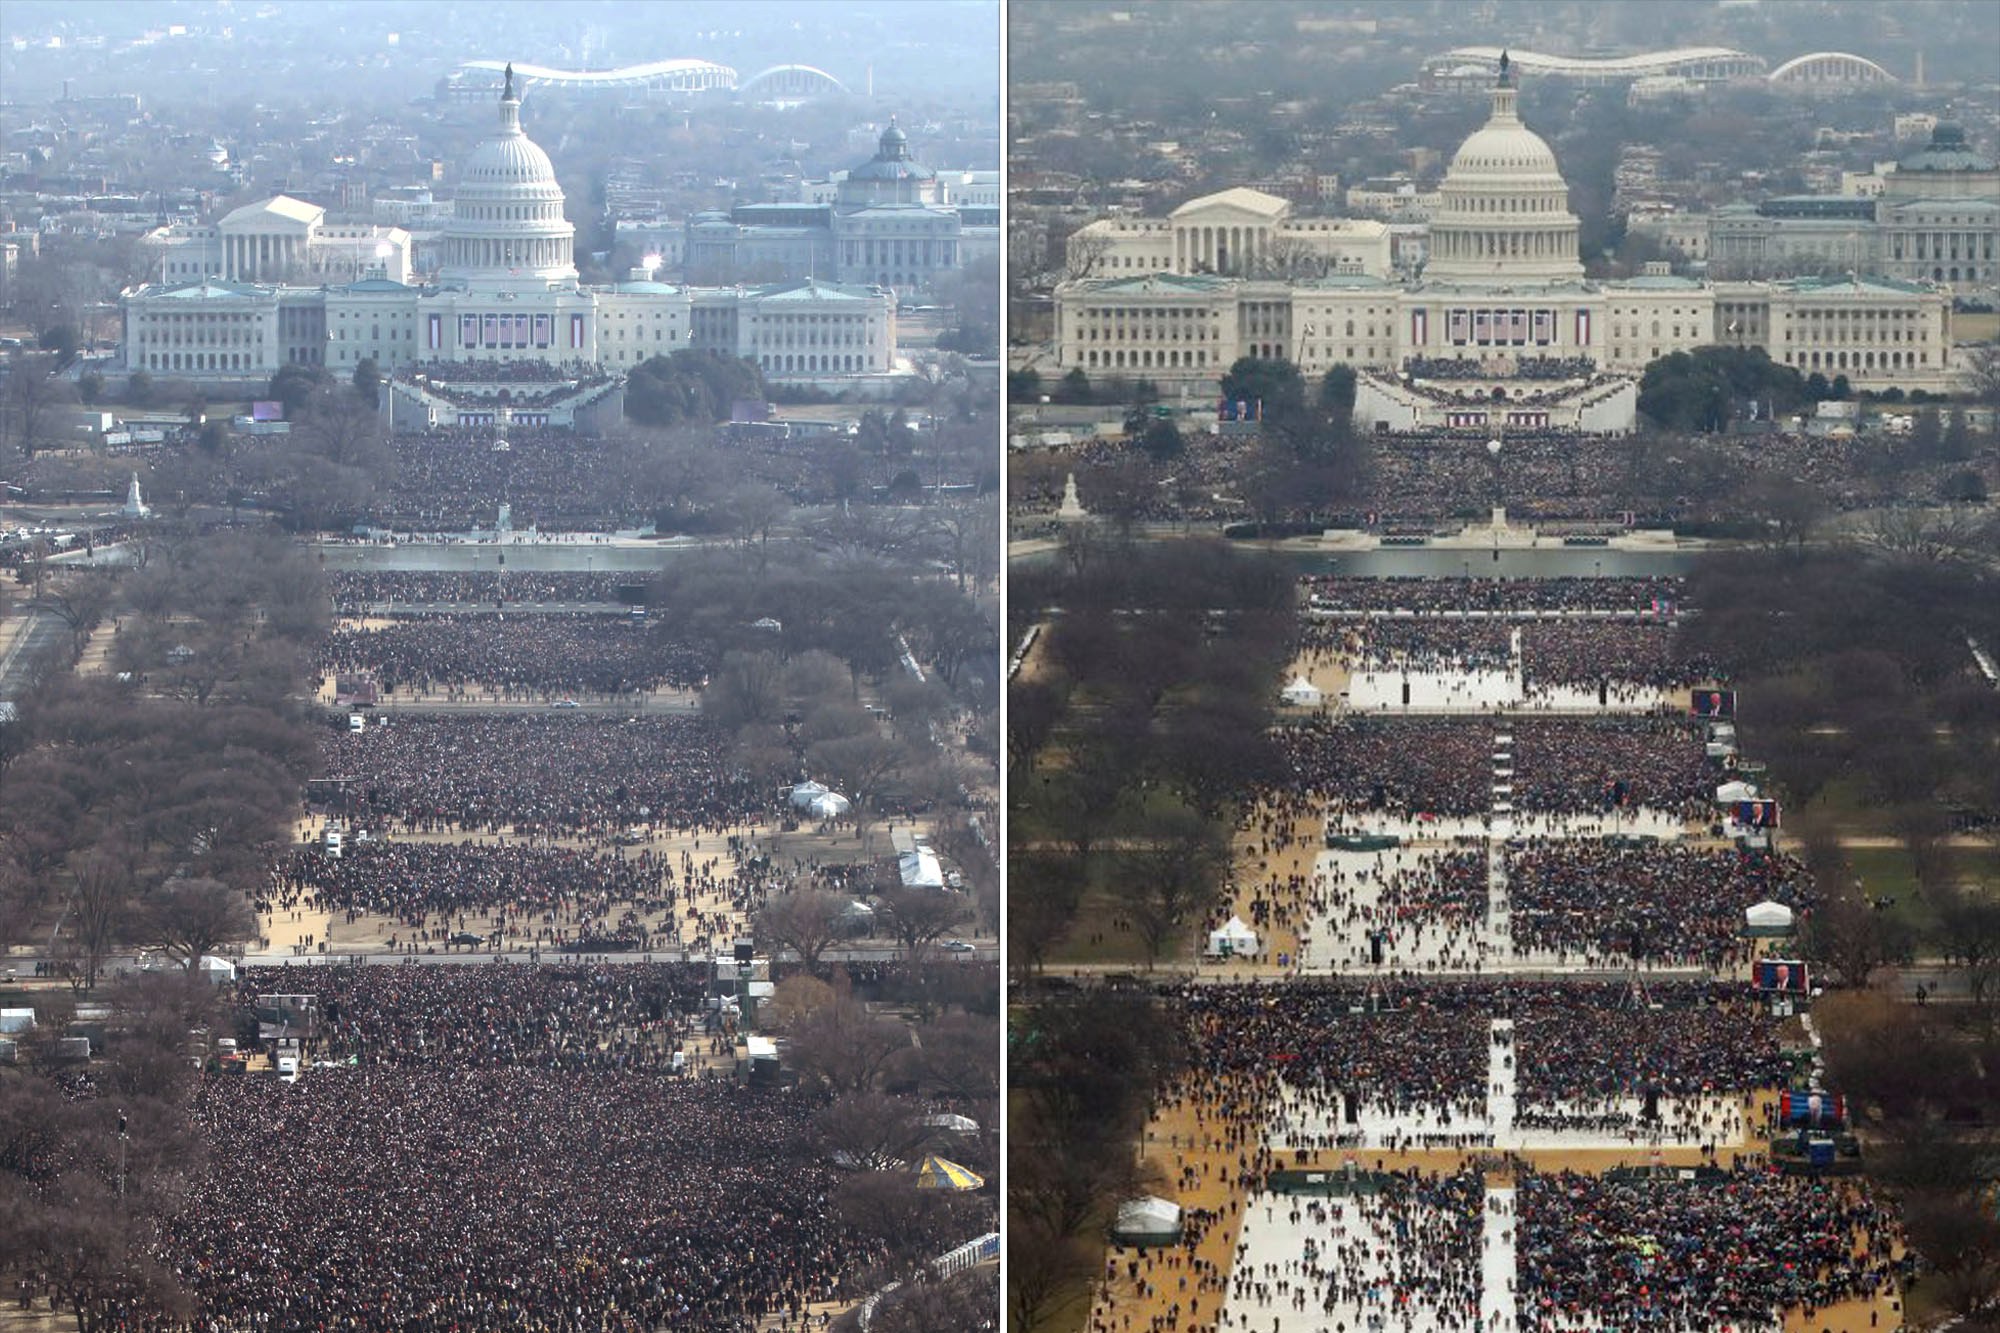 President Trump’s inauguration crowd not up to Barack Obama’s  in 2009